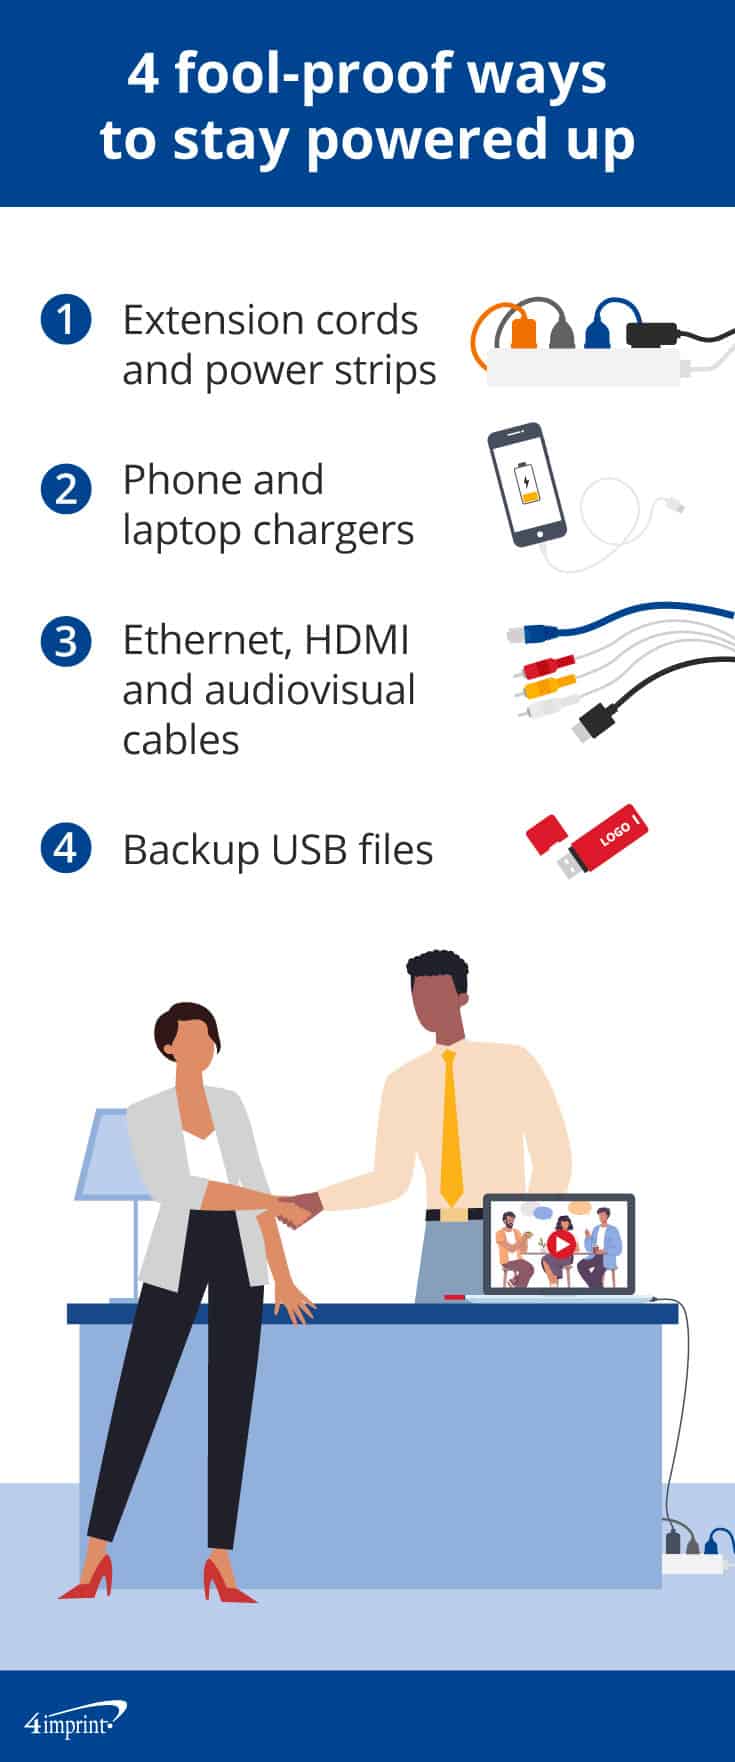 A man and woman shake hands with a charging laptop nearby, surrounded by icons of a power strip, phone with low battery, charging cables and USB drive.